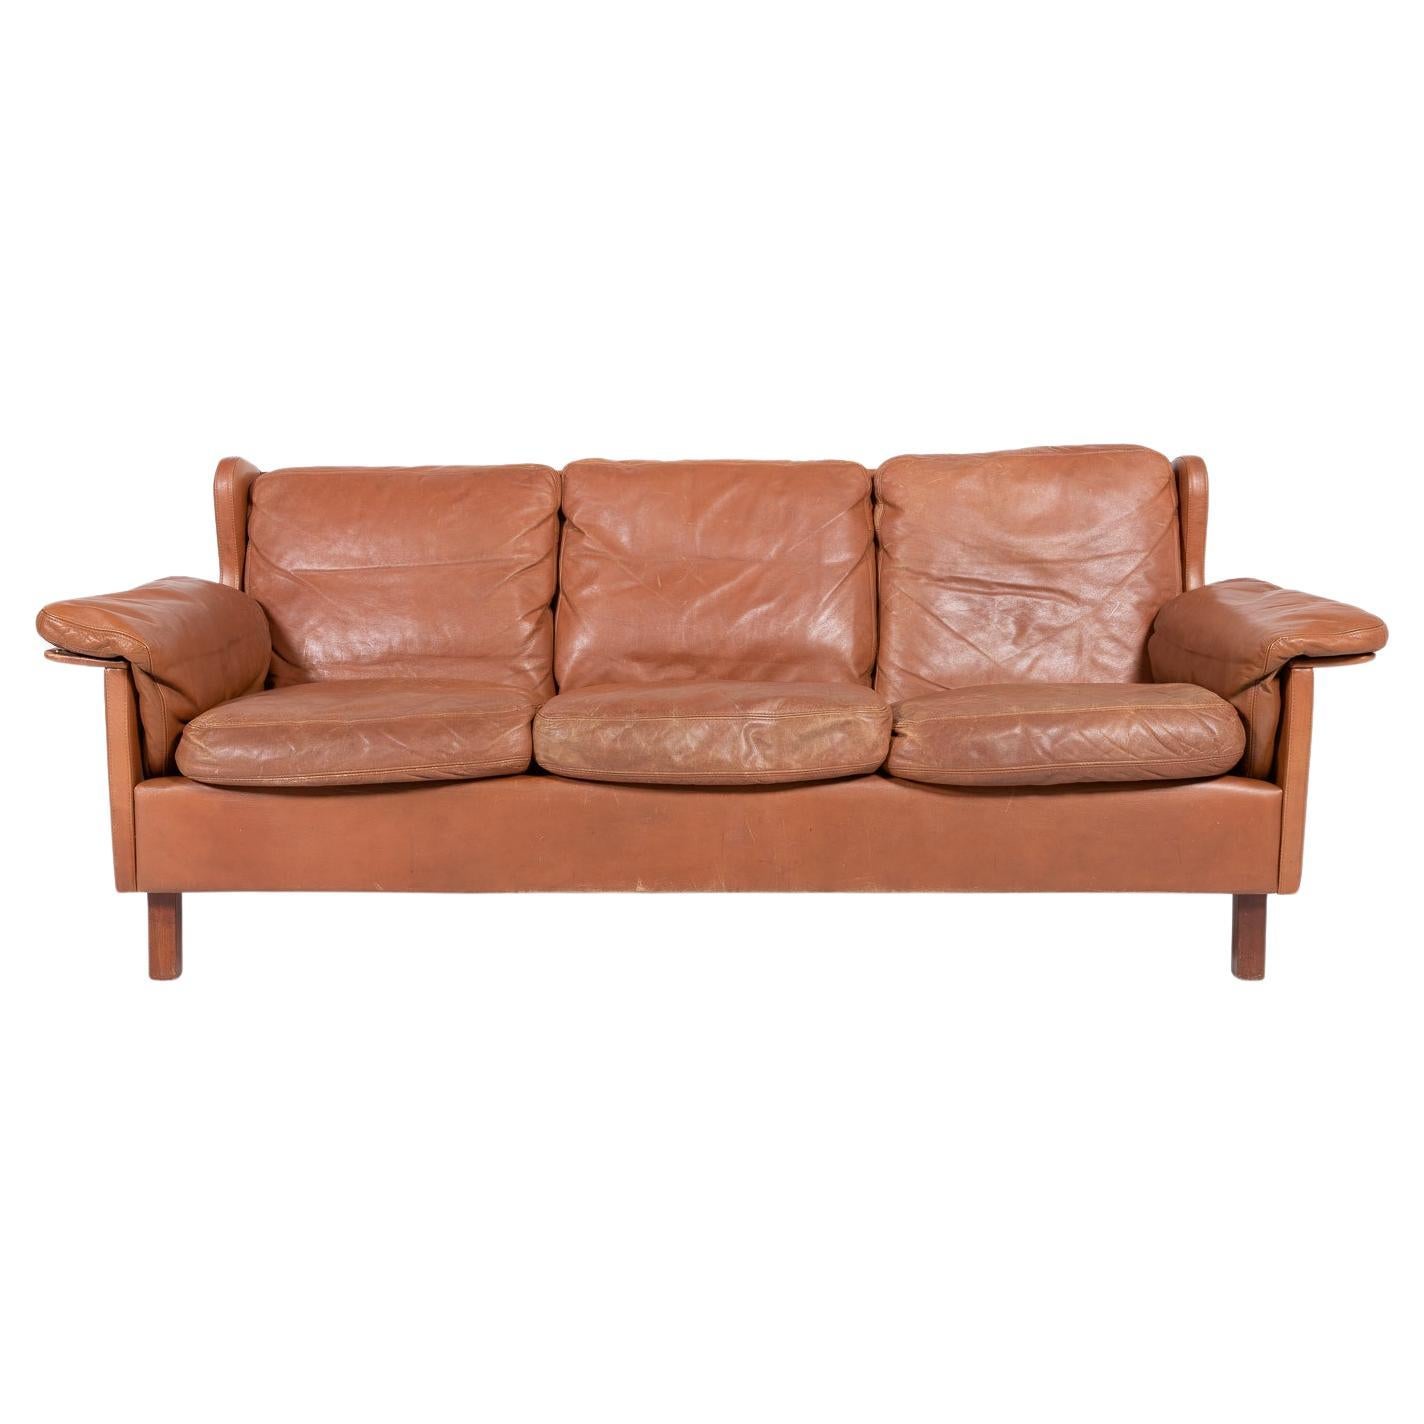 1970’s Danish Modern cognac leather Wing sofa For Sale